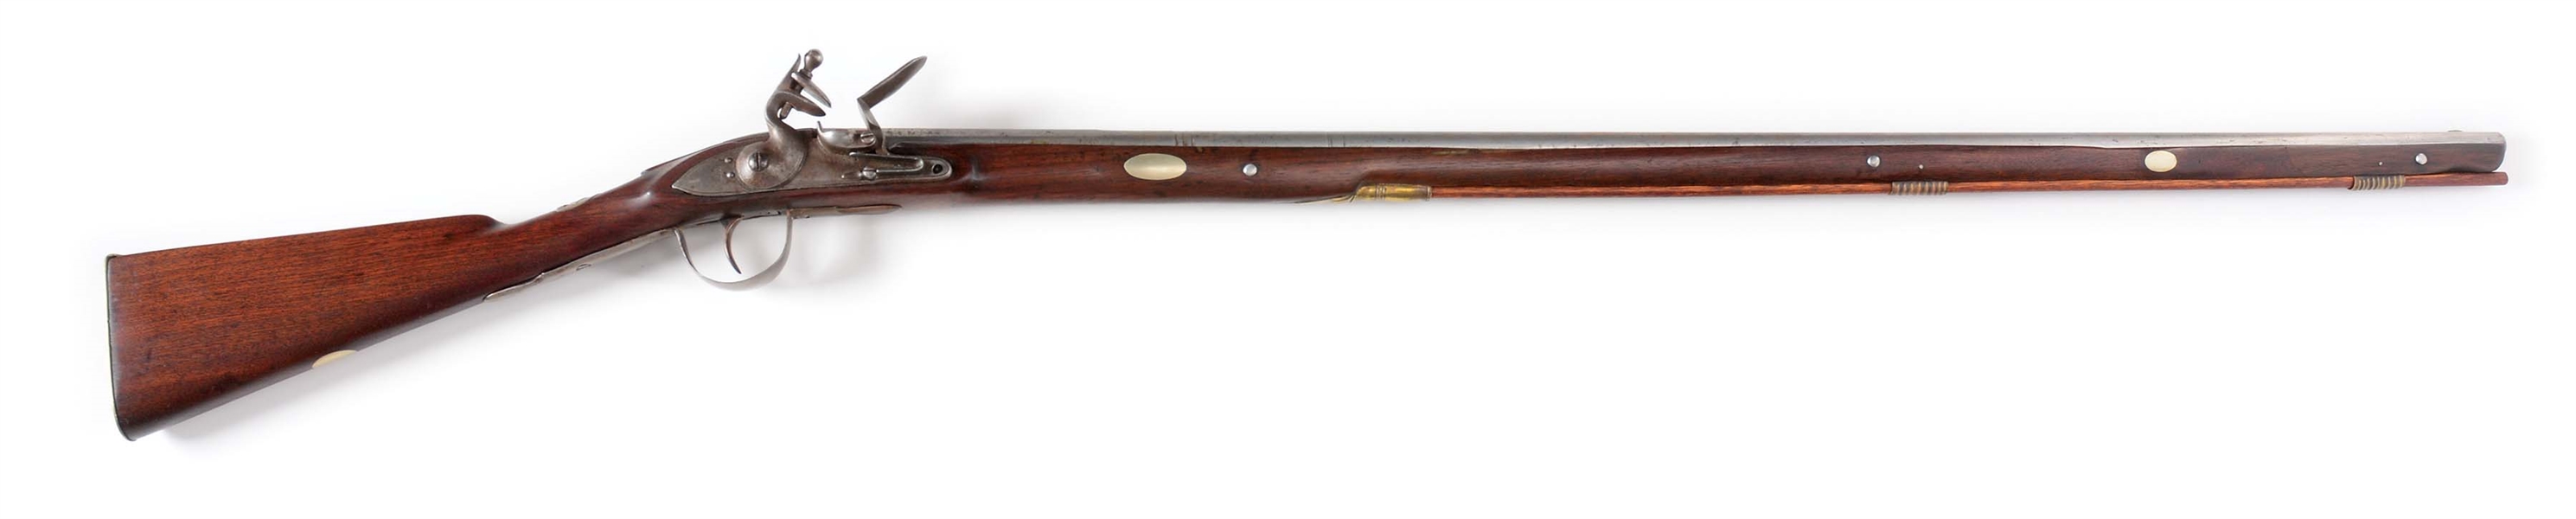 (A) TRYON INDIAN TRADE RIFLE. 